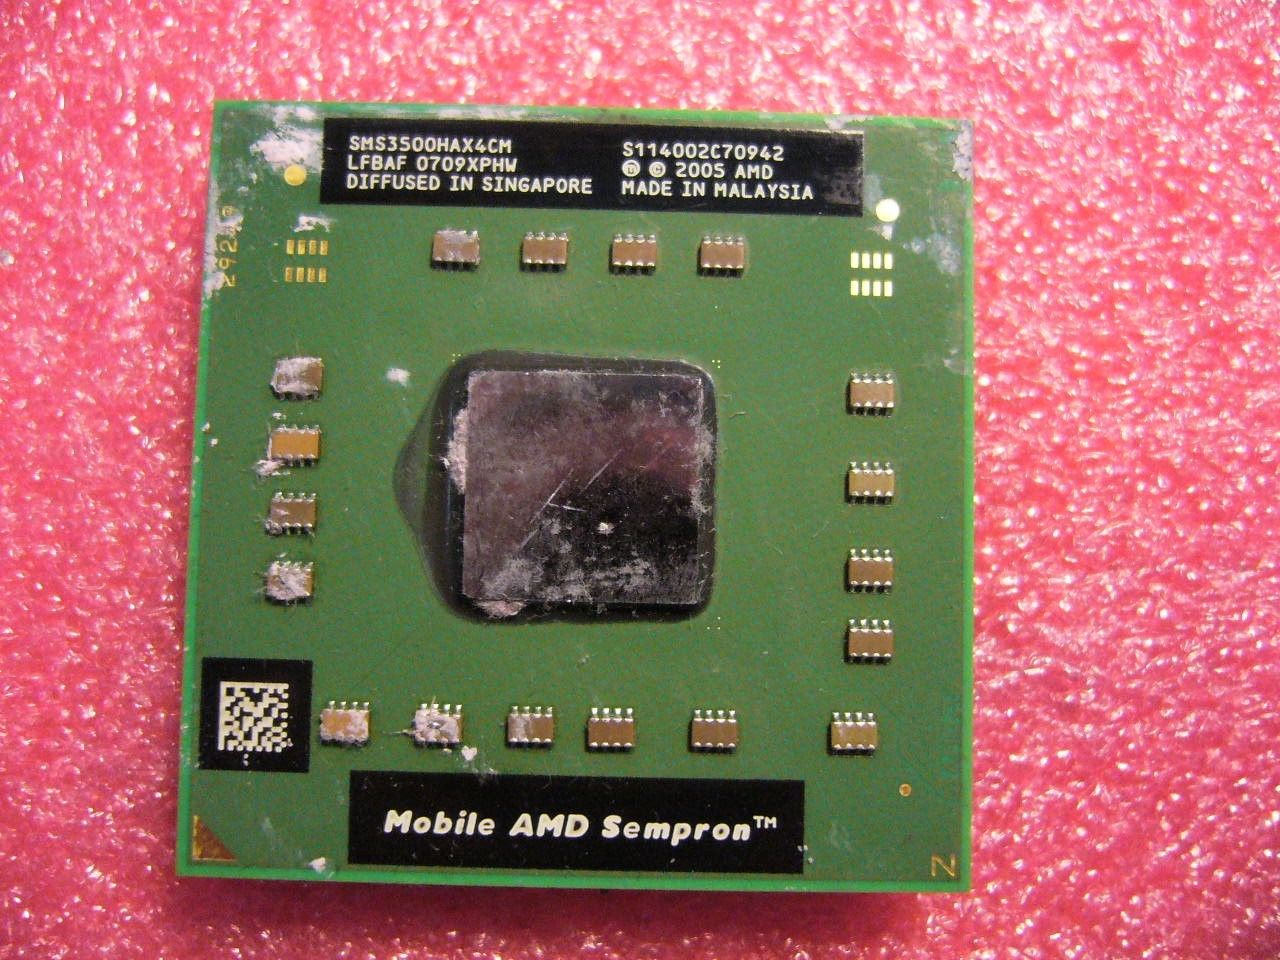 QTY 1x AMD Mobile Sempron 3500+ 1.8 GHz (SMS3500HAX4CM) CPU Socket S1 - Click Image to Close